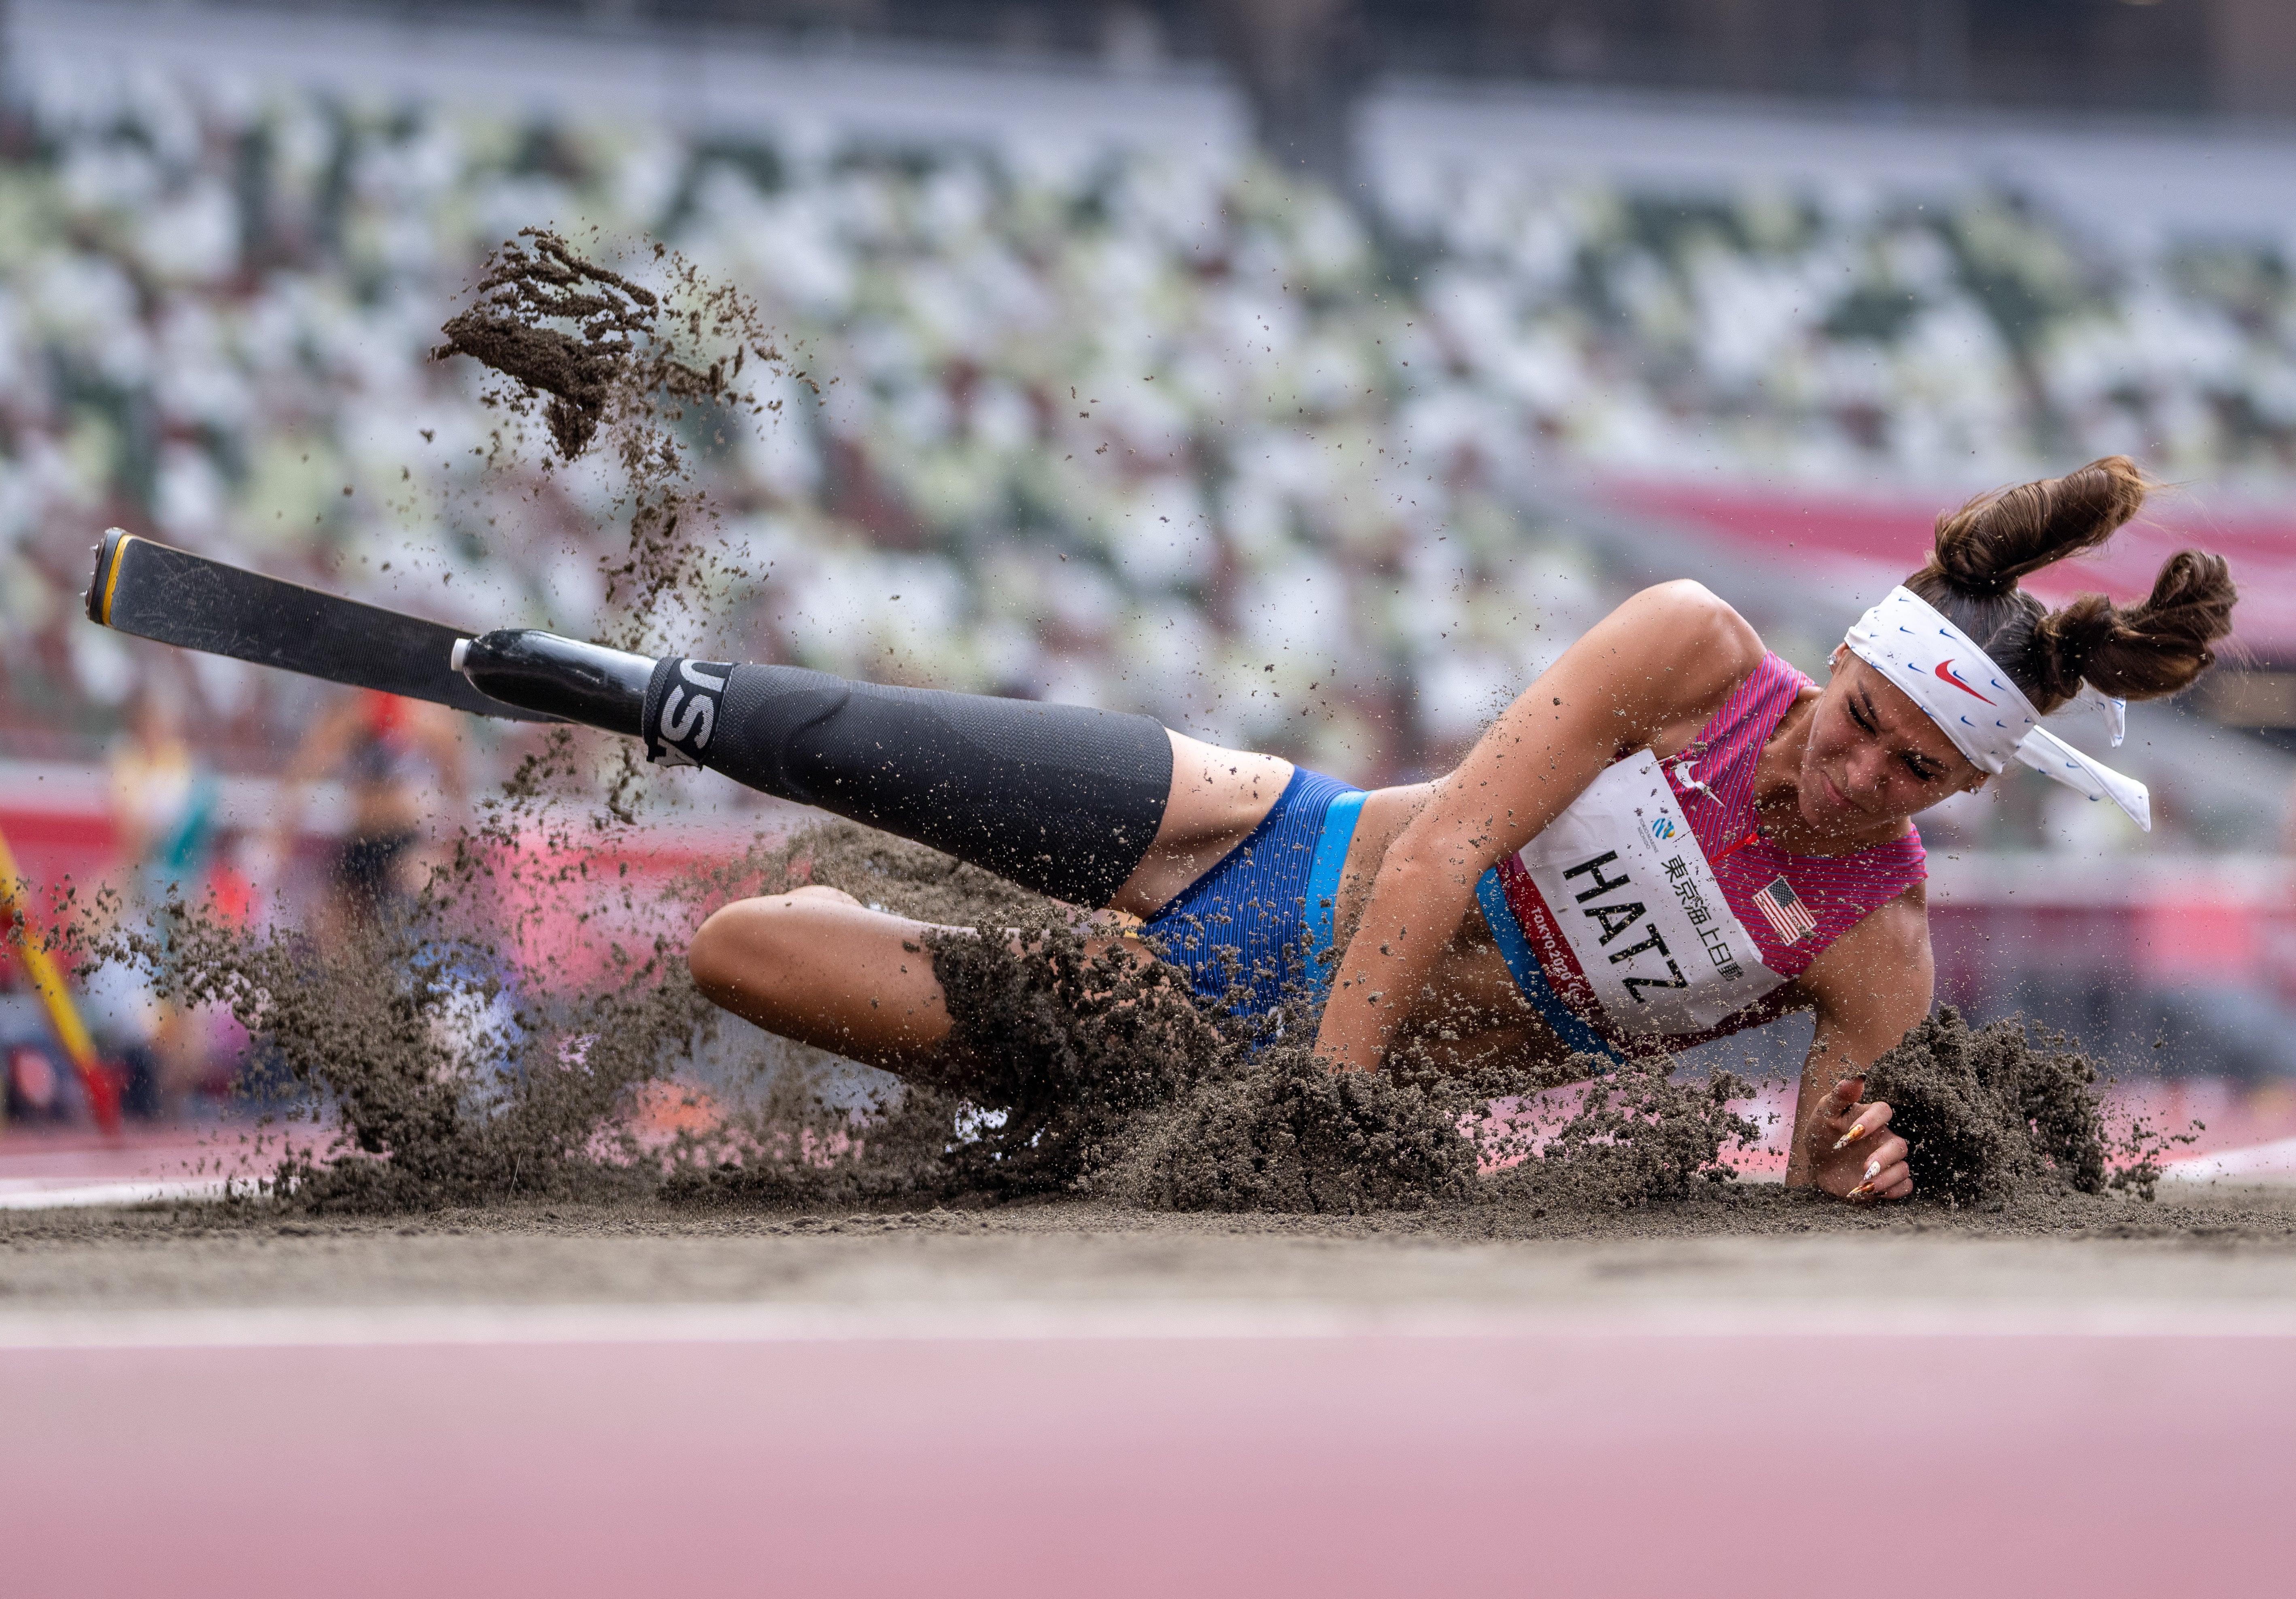 Beatriz Hatz of the US hits the sand hard while competing in the Women’s Long Jump – T64 at the Olympic Stadium (Thomas Lovelock for OIS/PA)